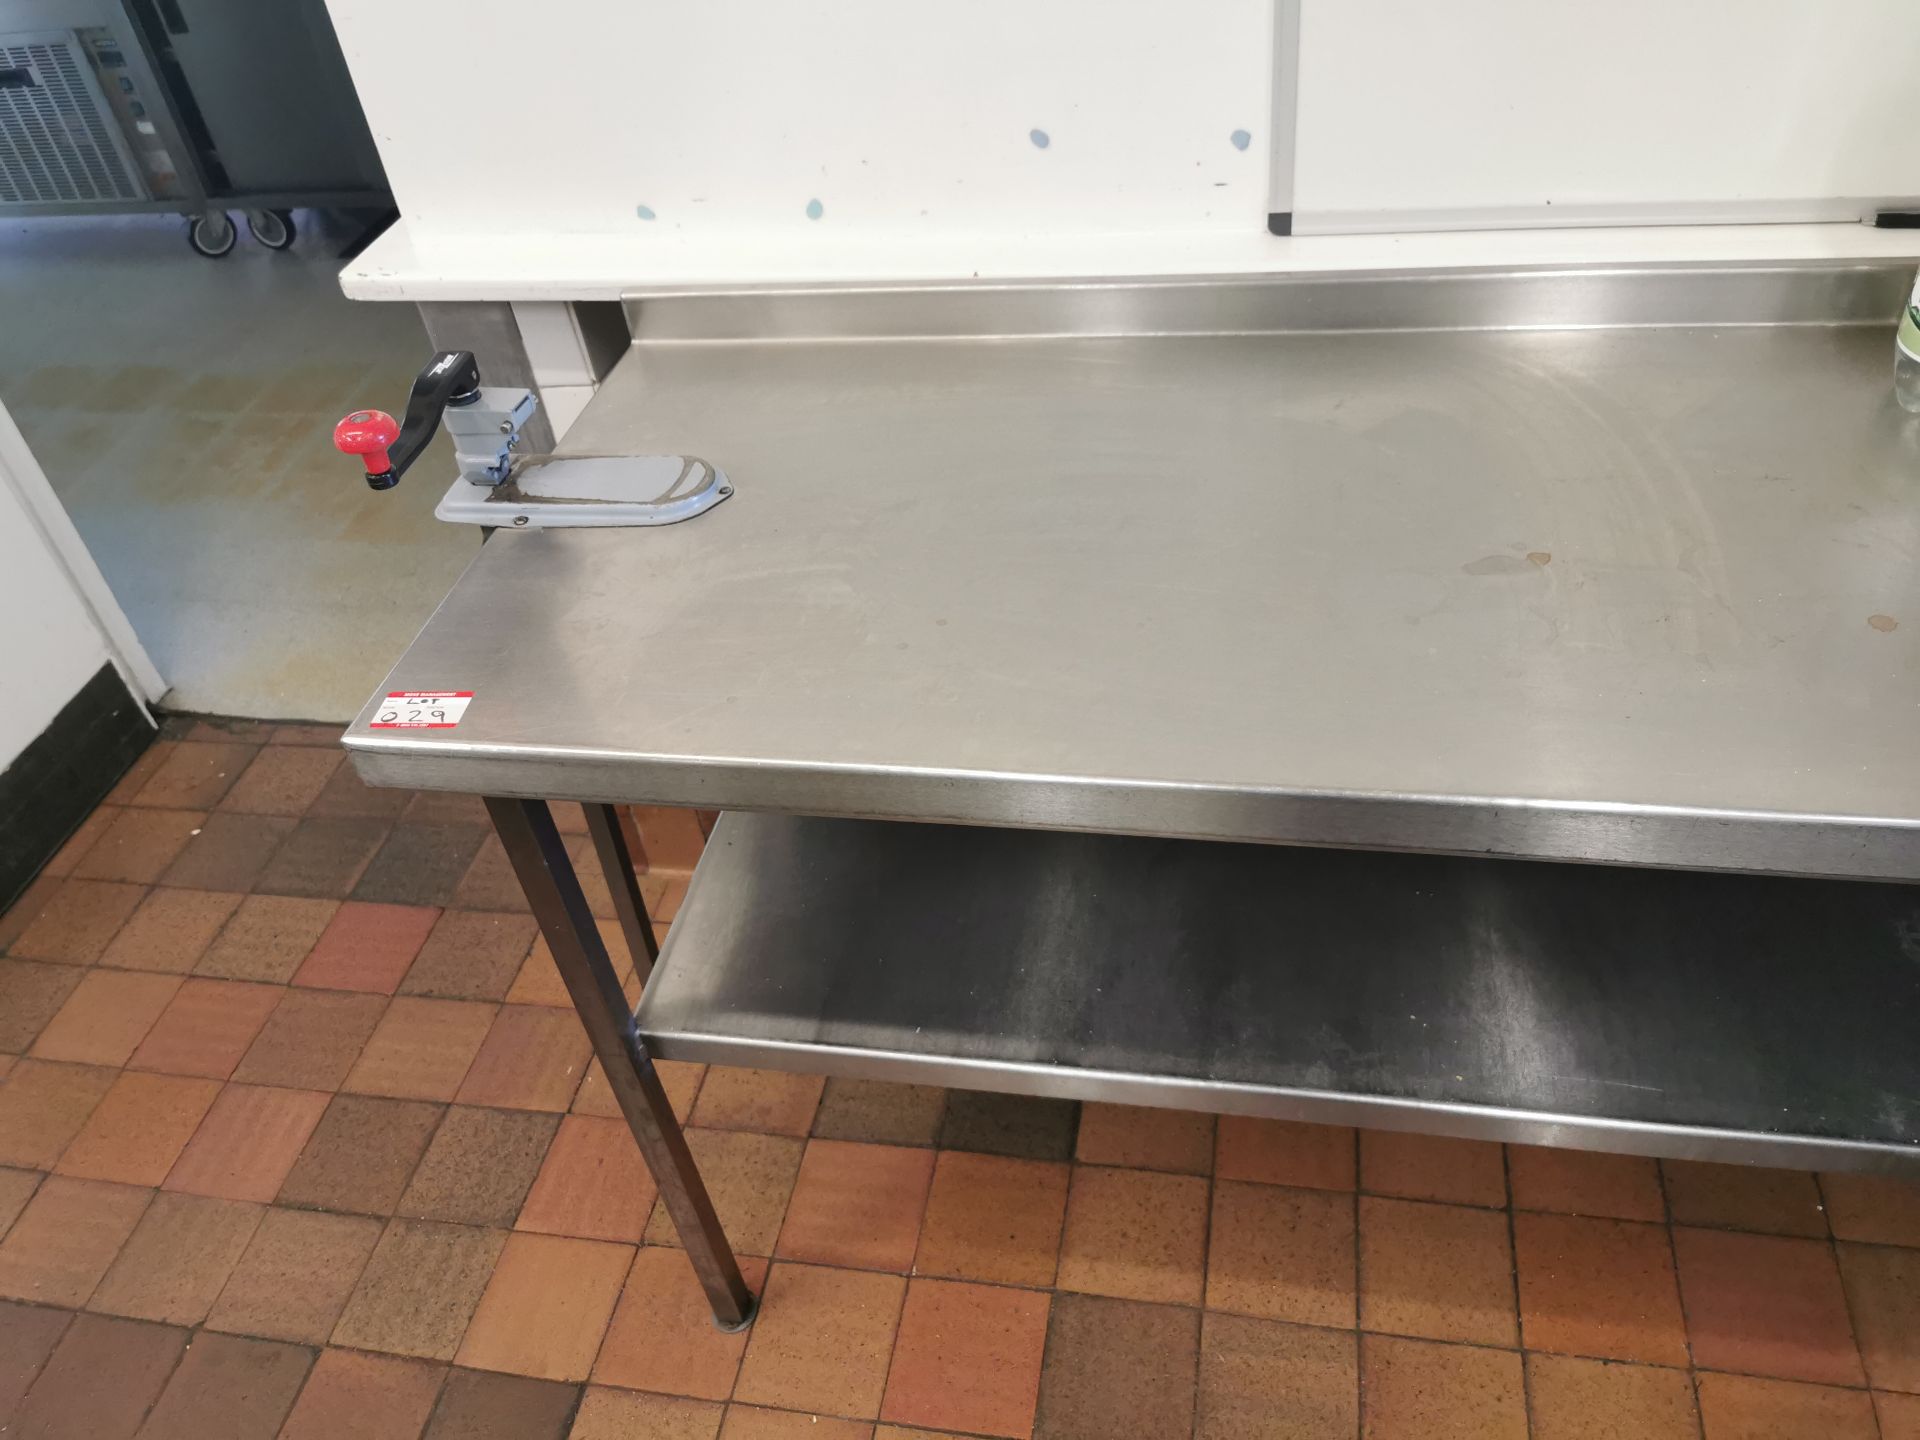 Excel Stainless steel kitchen worktop with tin opener built in 5.5 ft